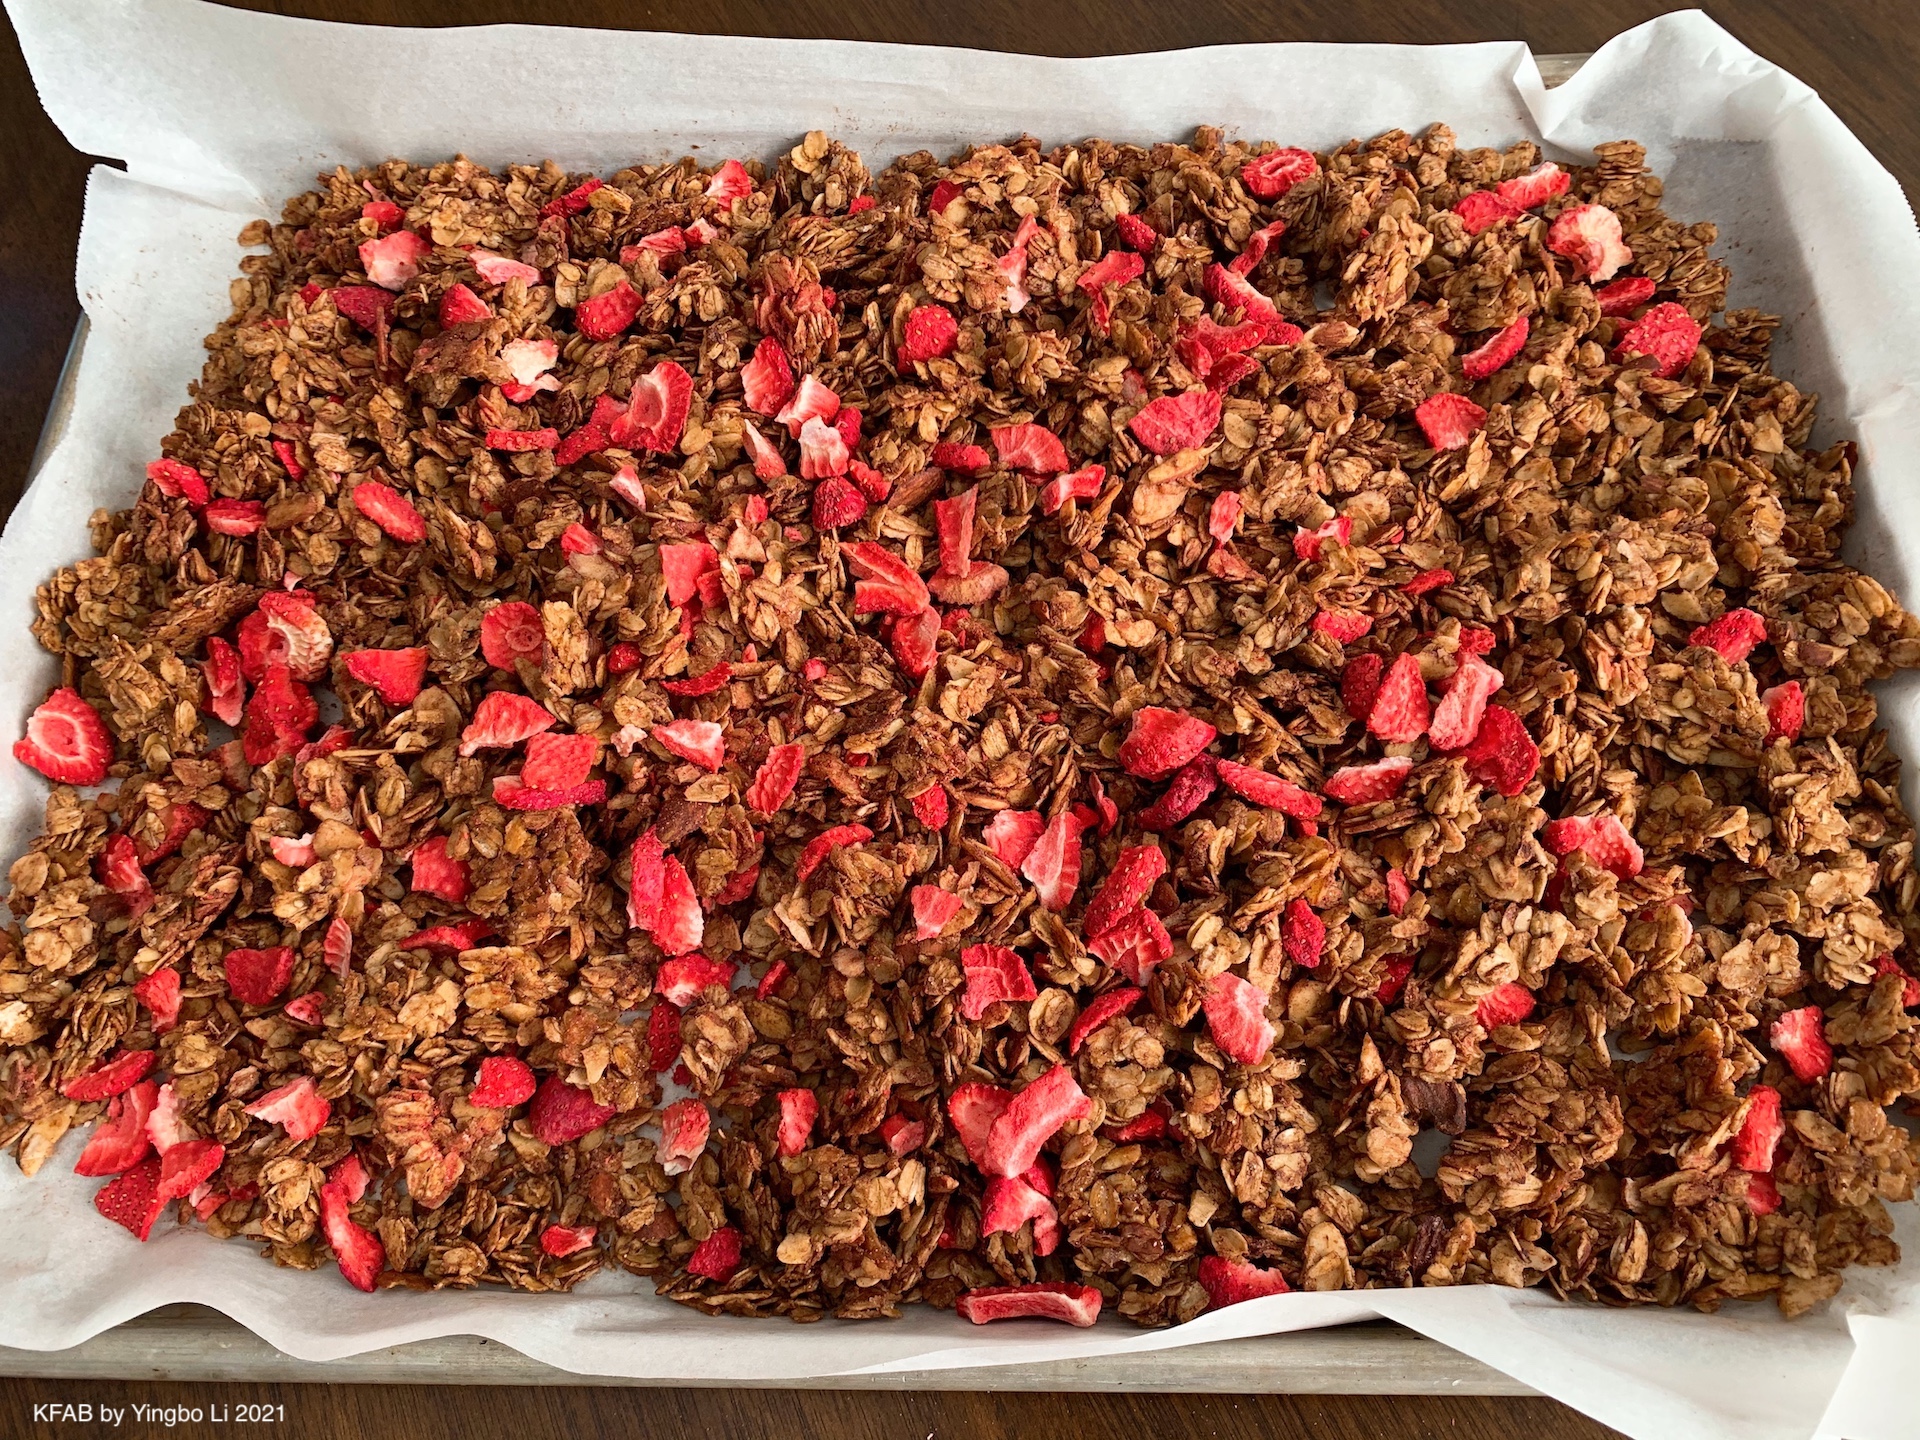 Chocolate Granola with Almond and Strawberry